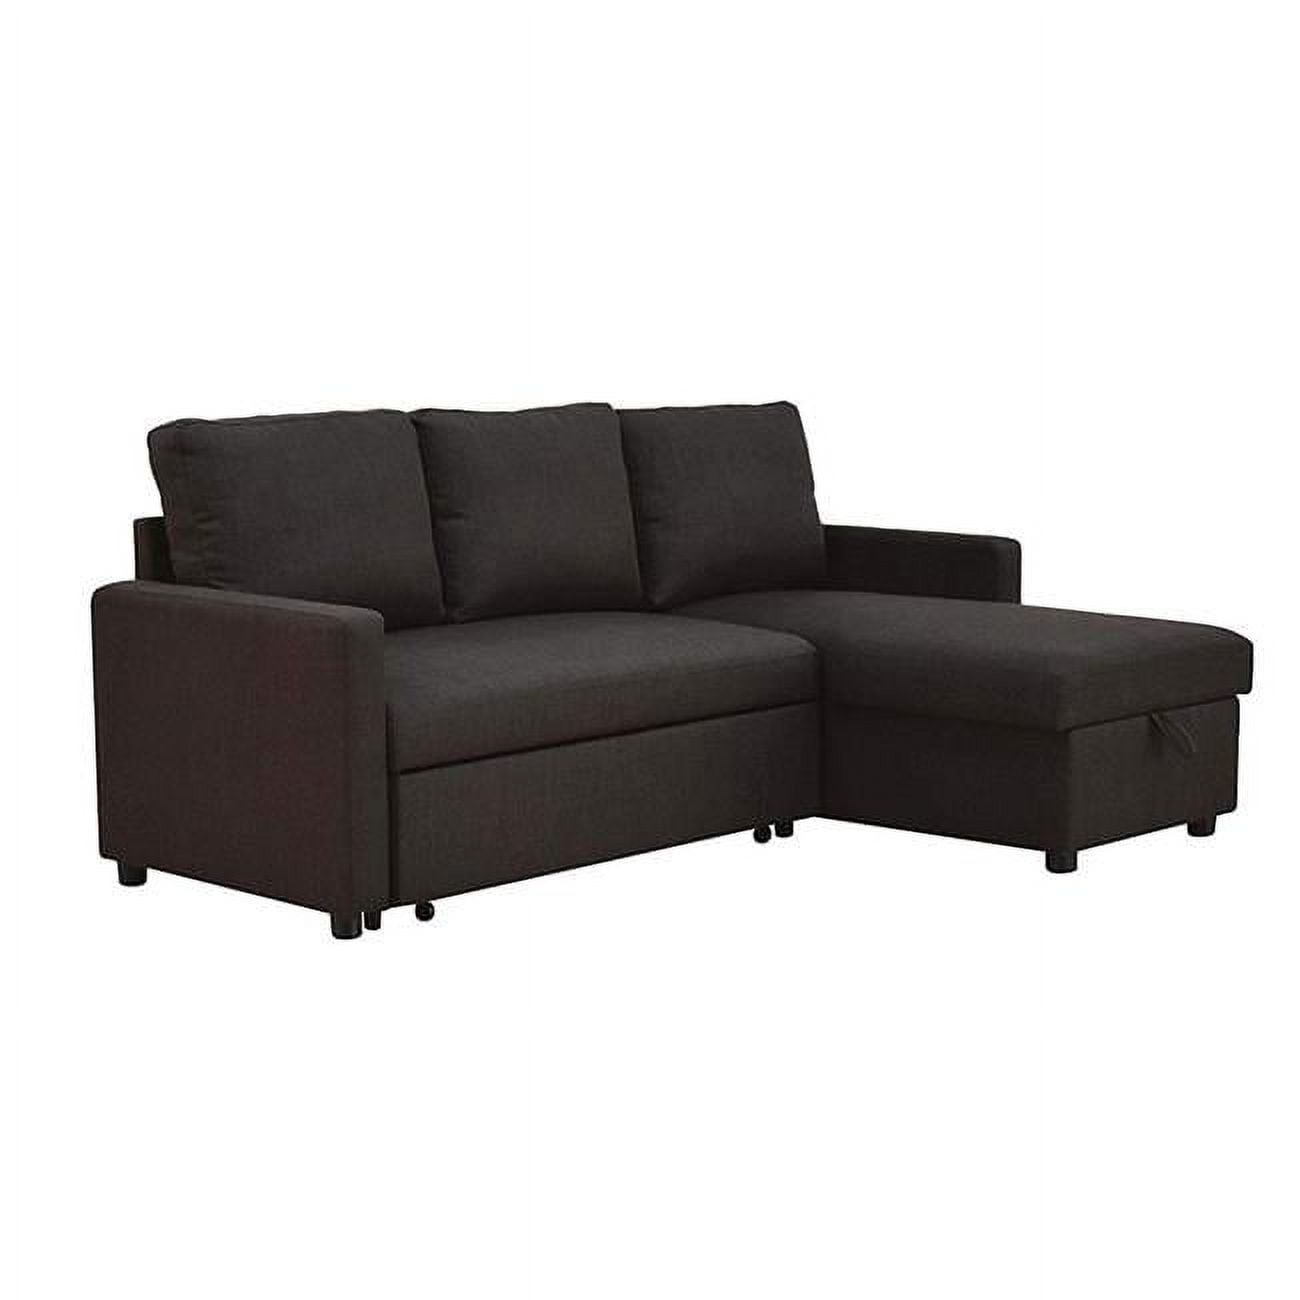 Bm196865 Fabric Upholstered Sectional Sofa With Pull Out Sleeper & Hidden Storage, Black